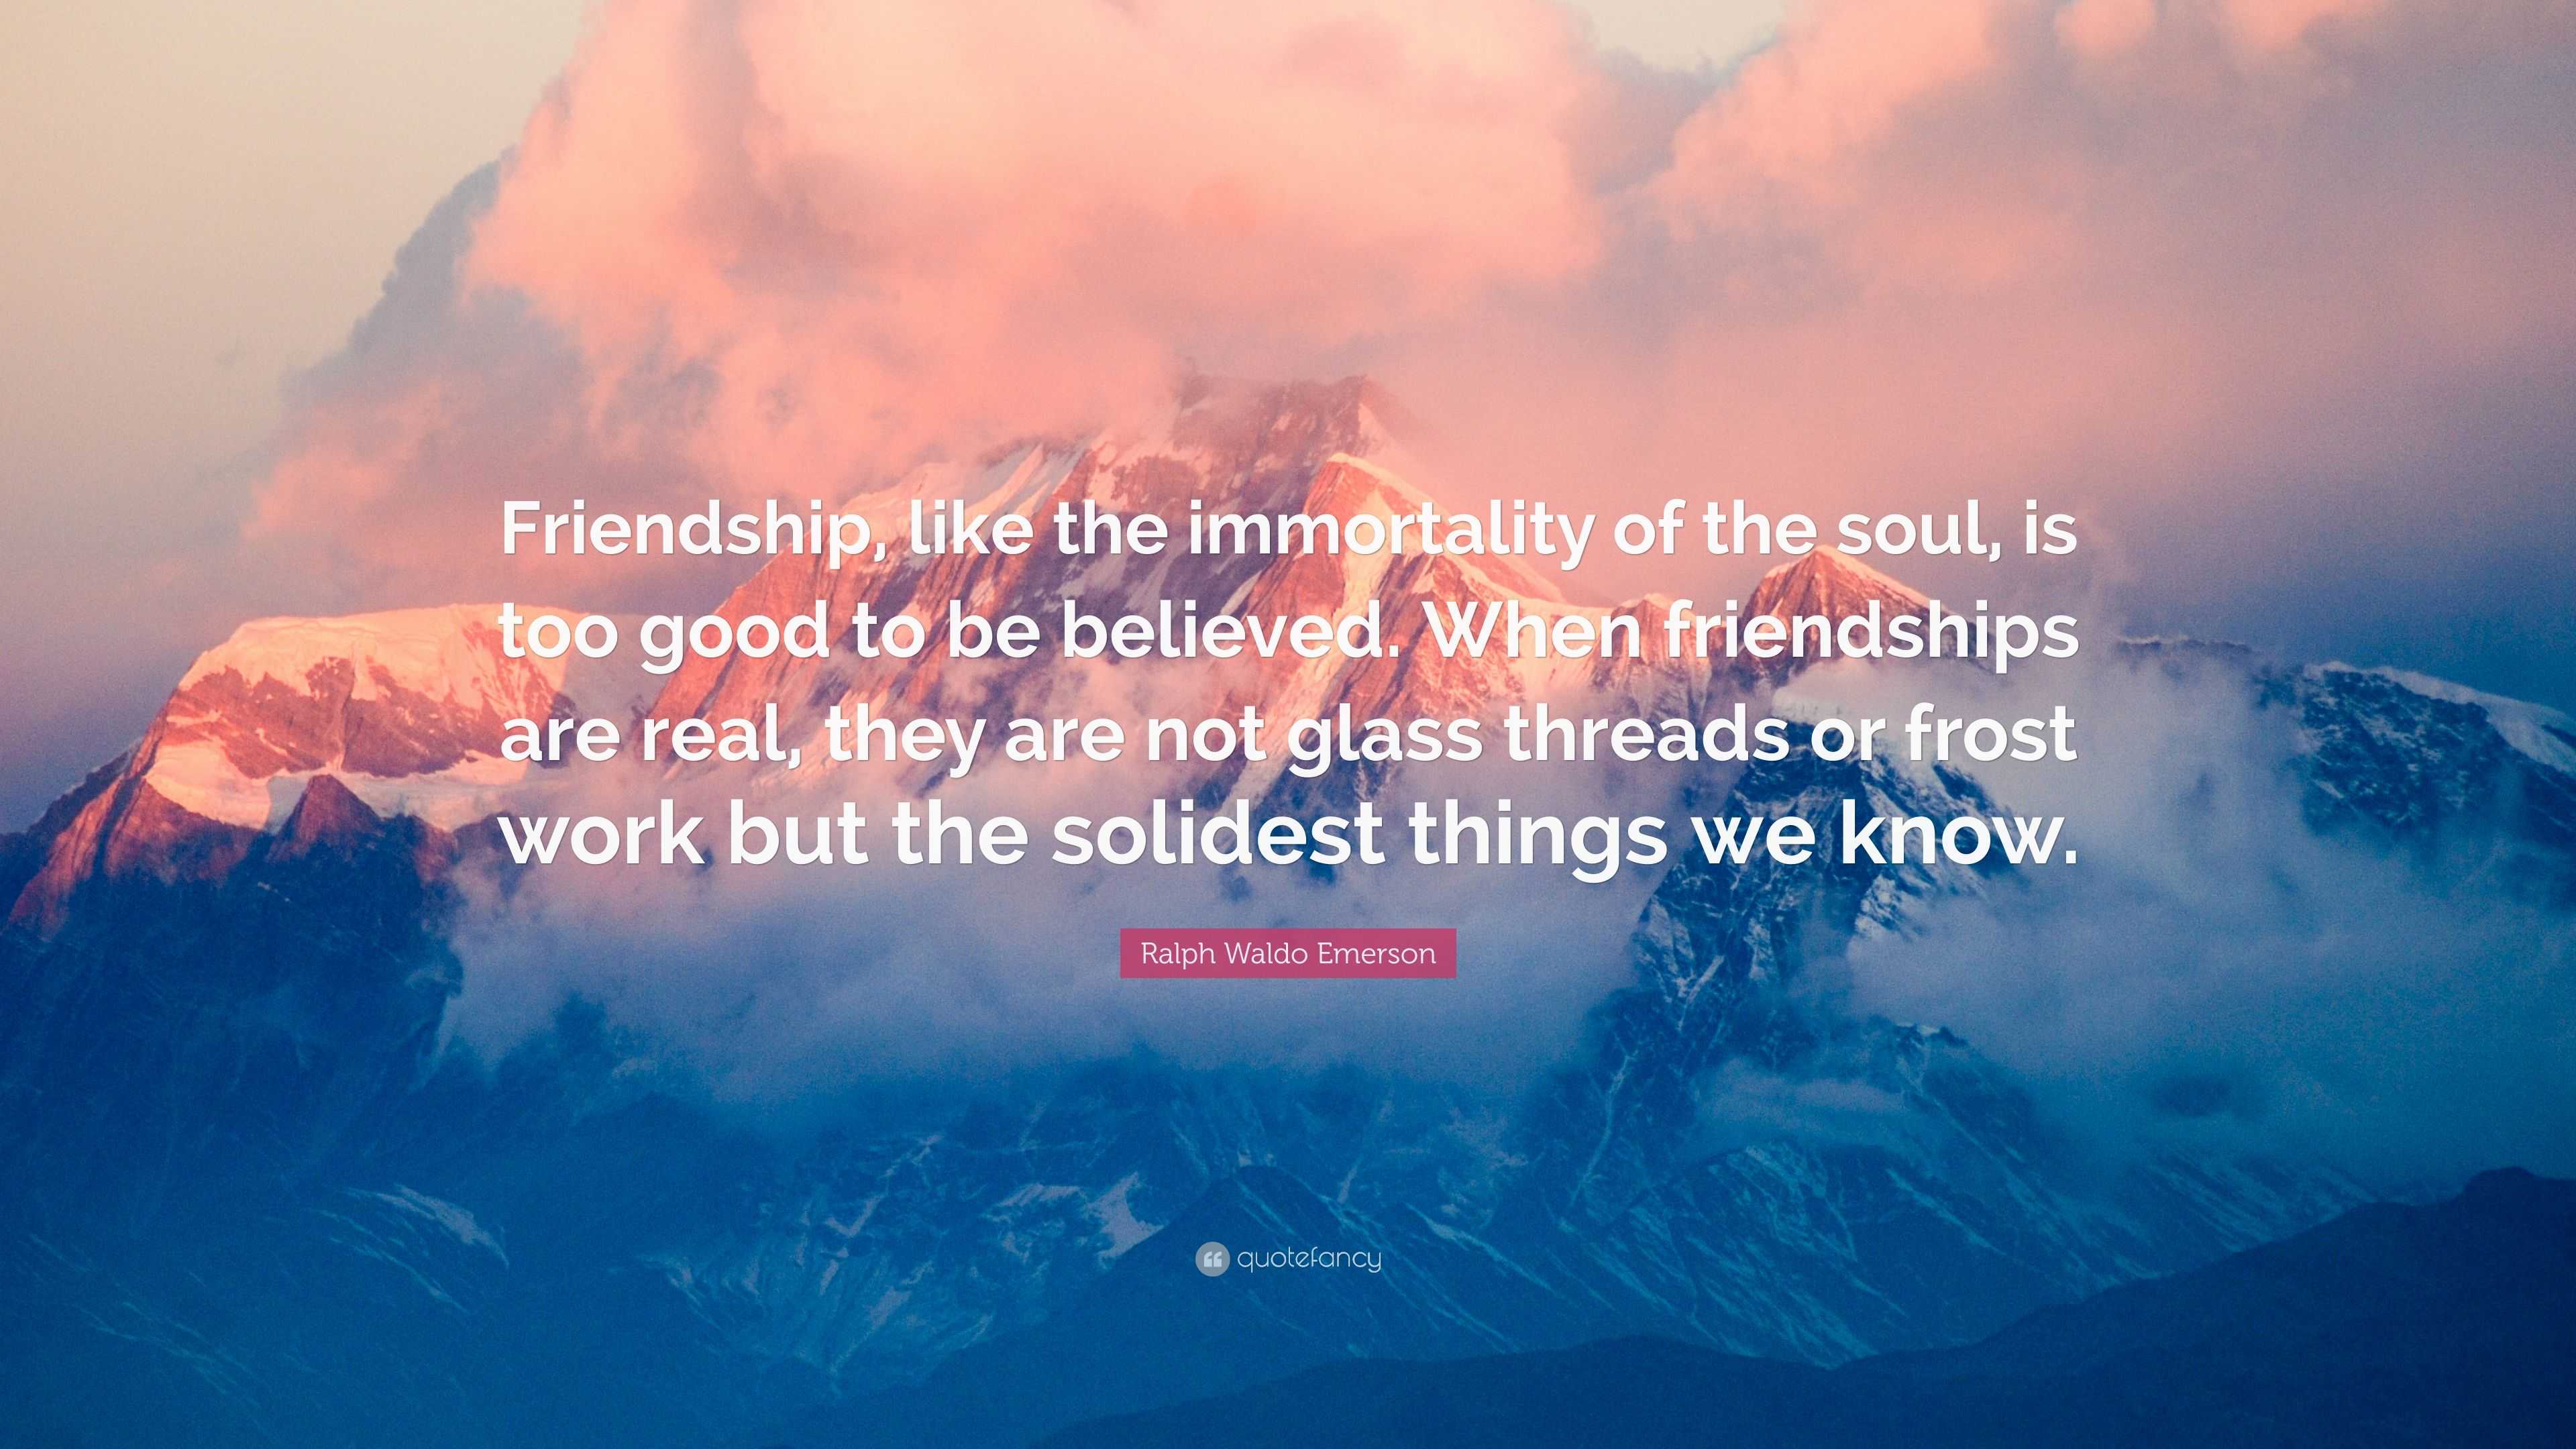 Ralph Waldo Emerson Quote: “Friendship, like the immortality of the